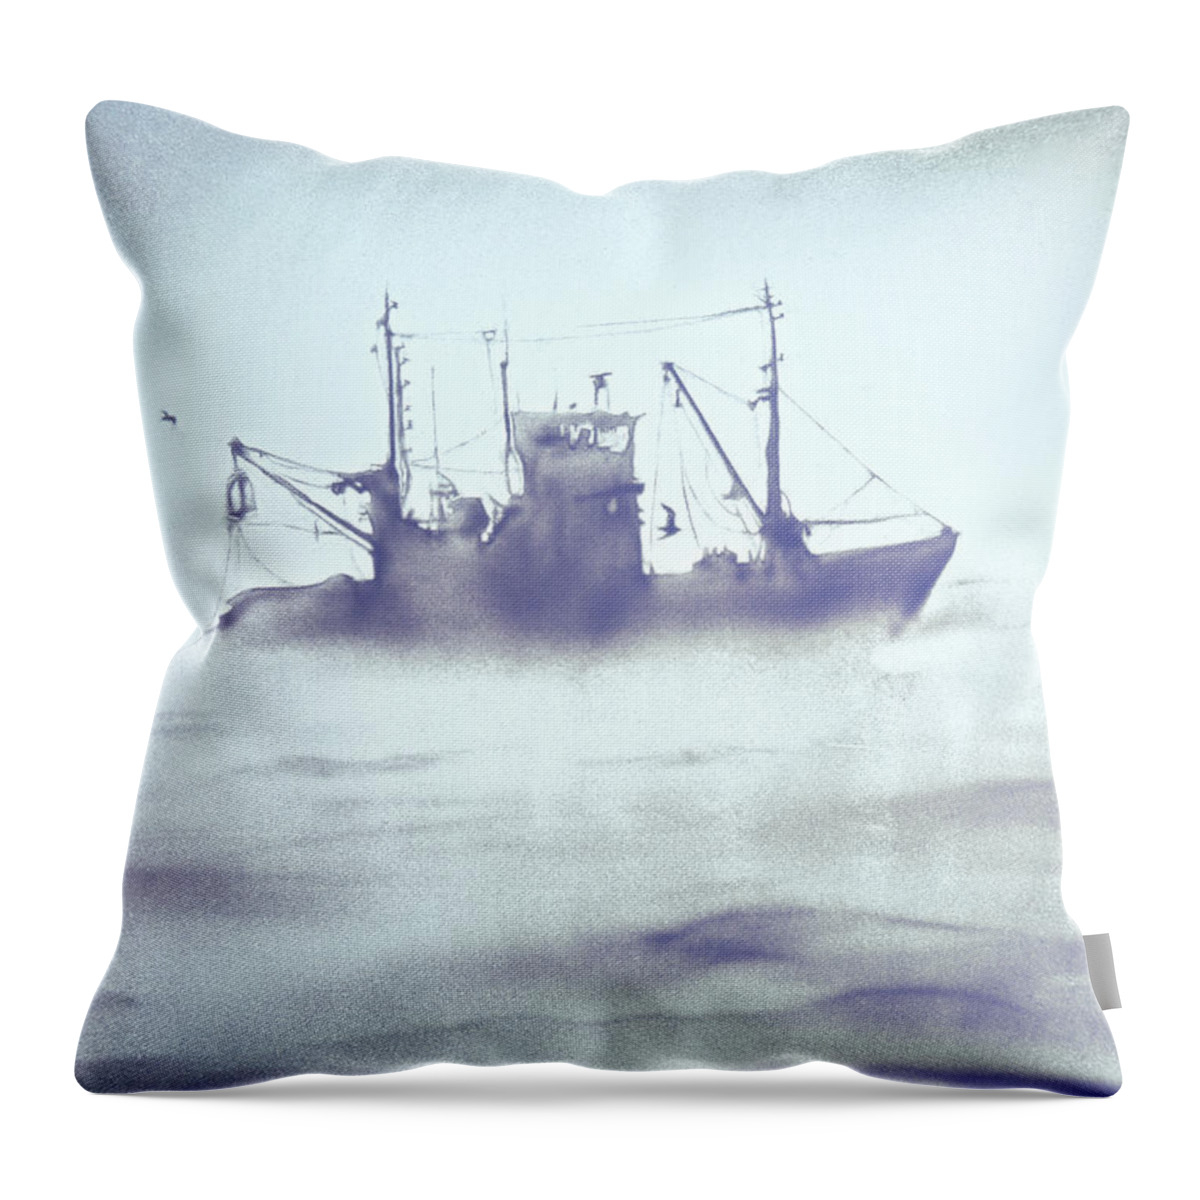 The Little Prince Throw Pillow featuring the painting Boat in the Foggy Sea by Elena Vedernikova